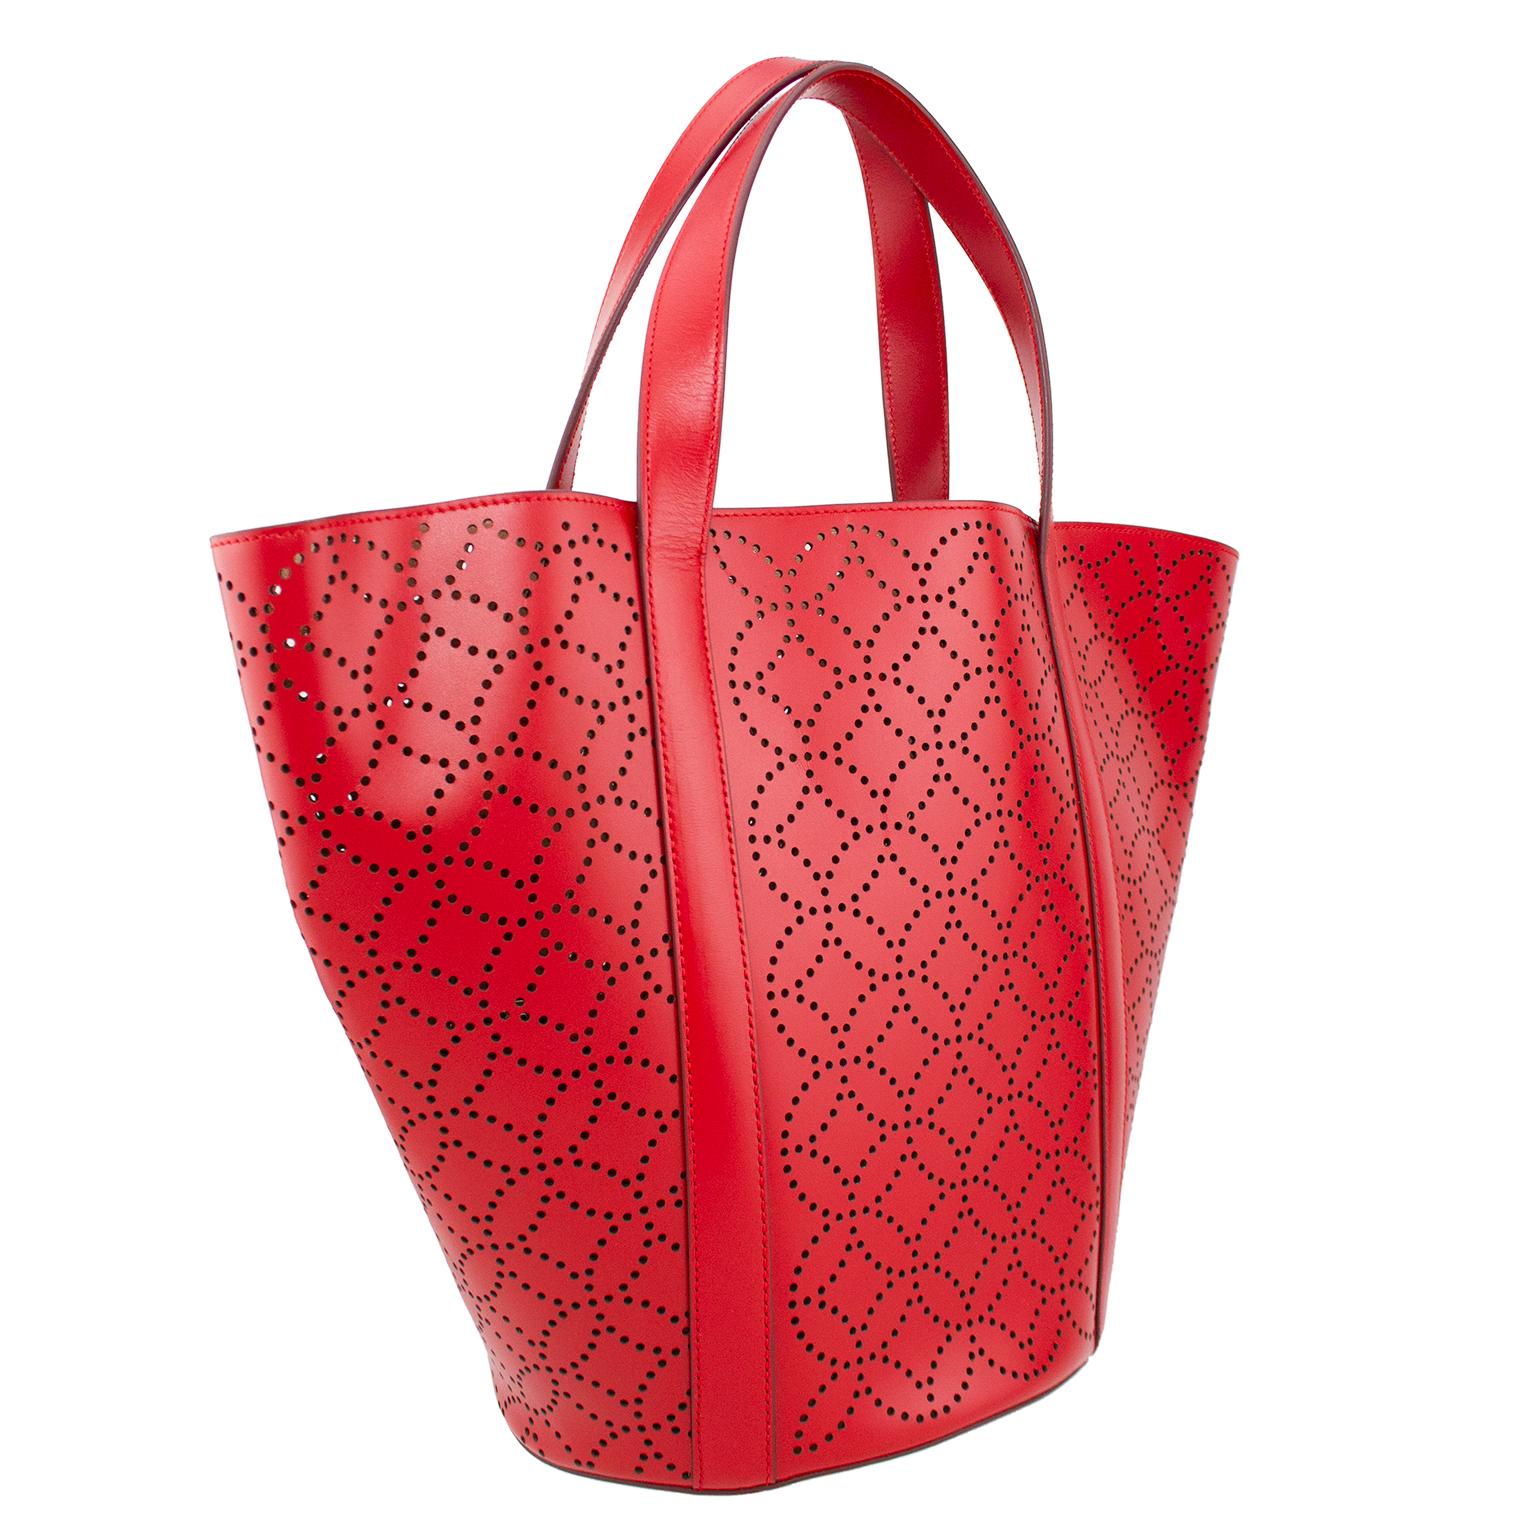 Beautiful, luxurious and unused Alaia bag. Laser cut supple red leather in an iconic Alaia pattern. Open top and flat top handles with tonal top stitching. Interior red leather wristlet with silver top zipper and beige interior. Wristlet has a